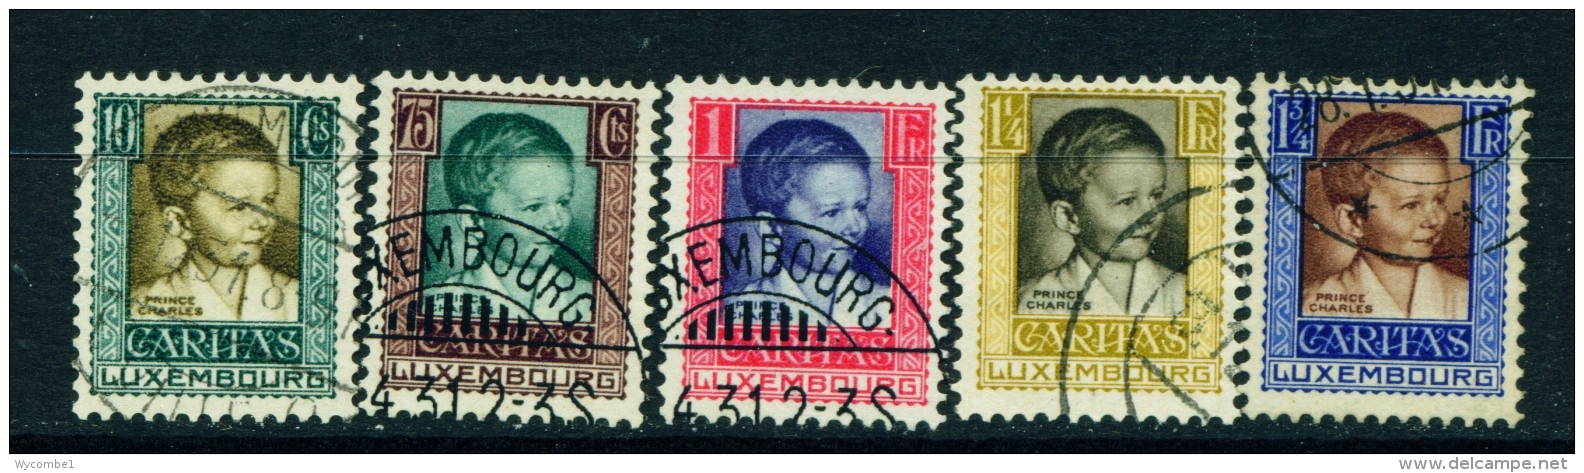 LUXEMBOURG  -  1930  Child Welfare Fund  Set  Used As Scan - Oblitérés